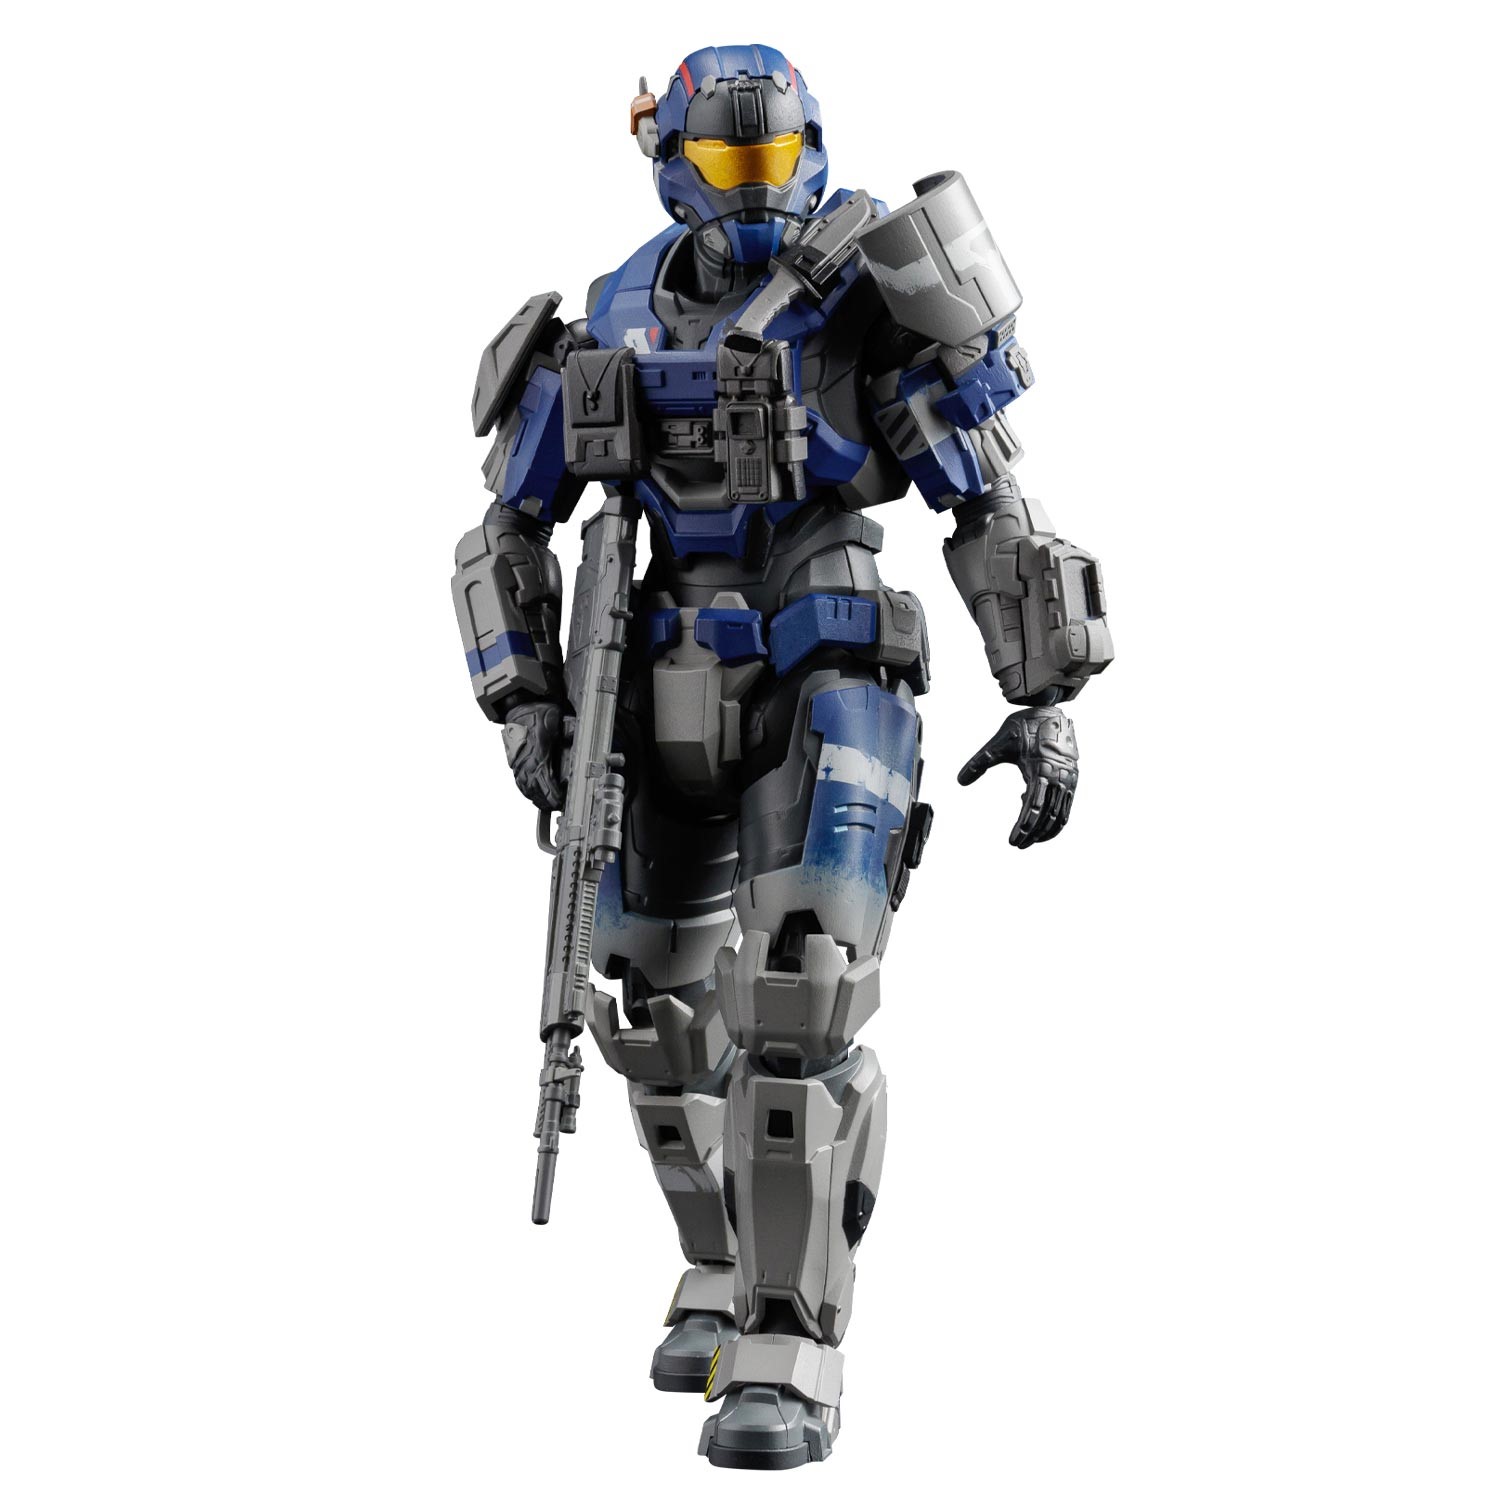 RE:EDIT HALO: REACH 1/12 SCALE CARTER-A259 (Noble One) 